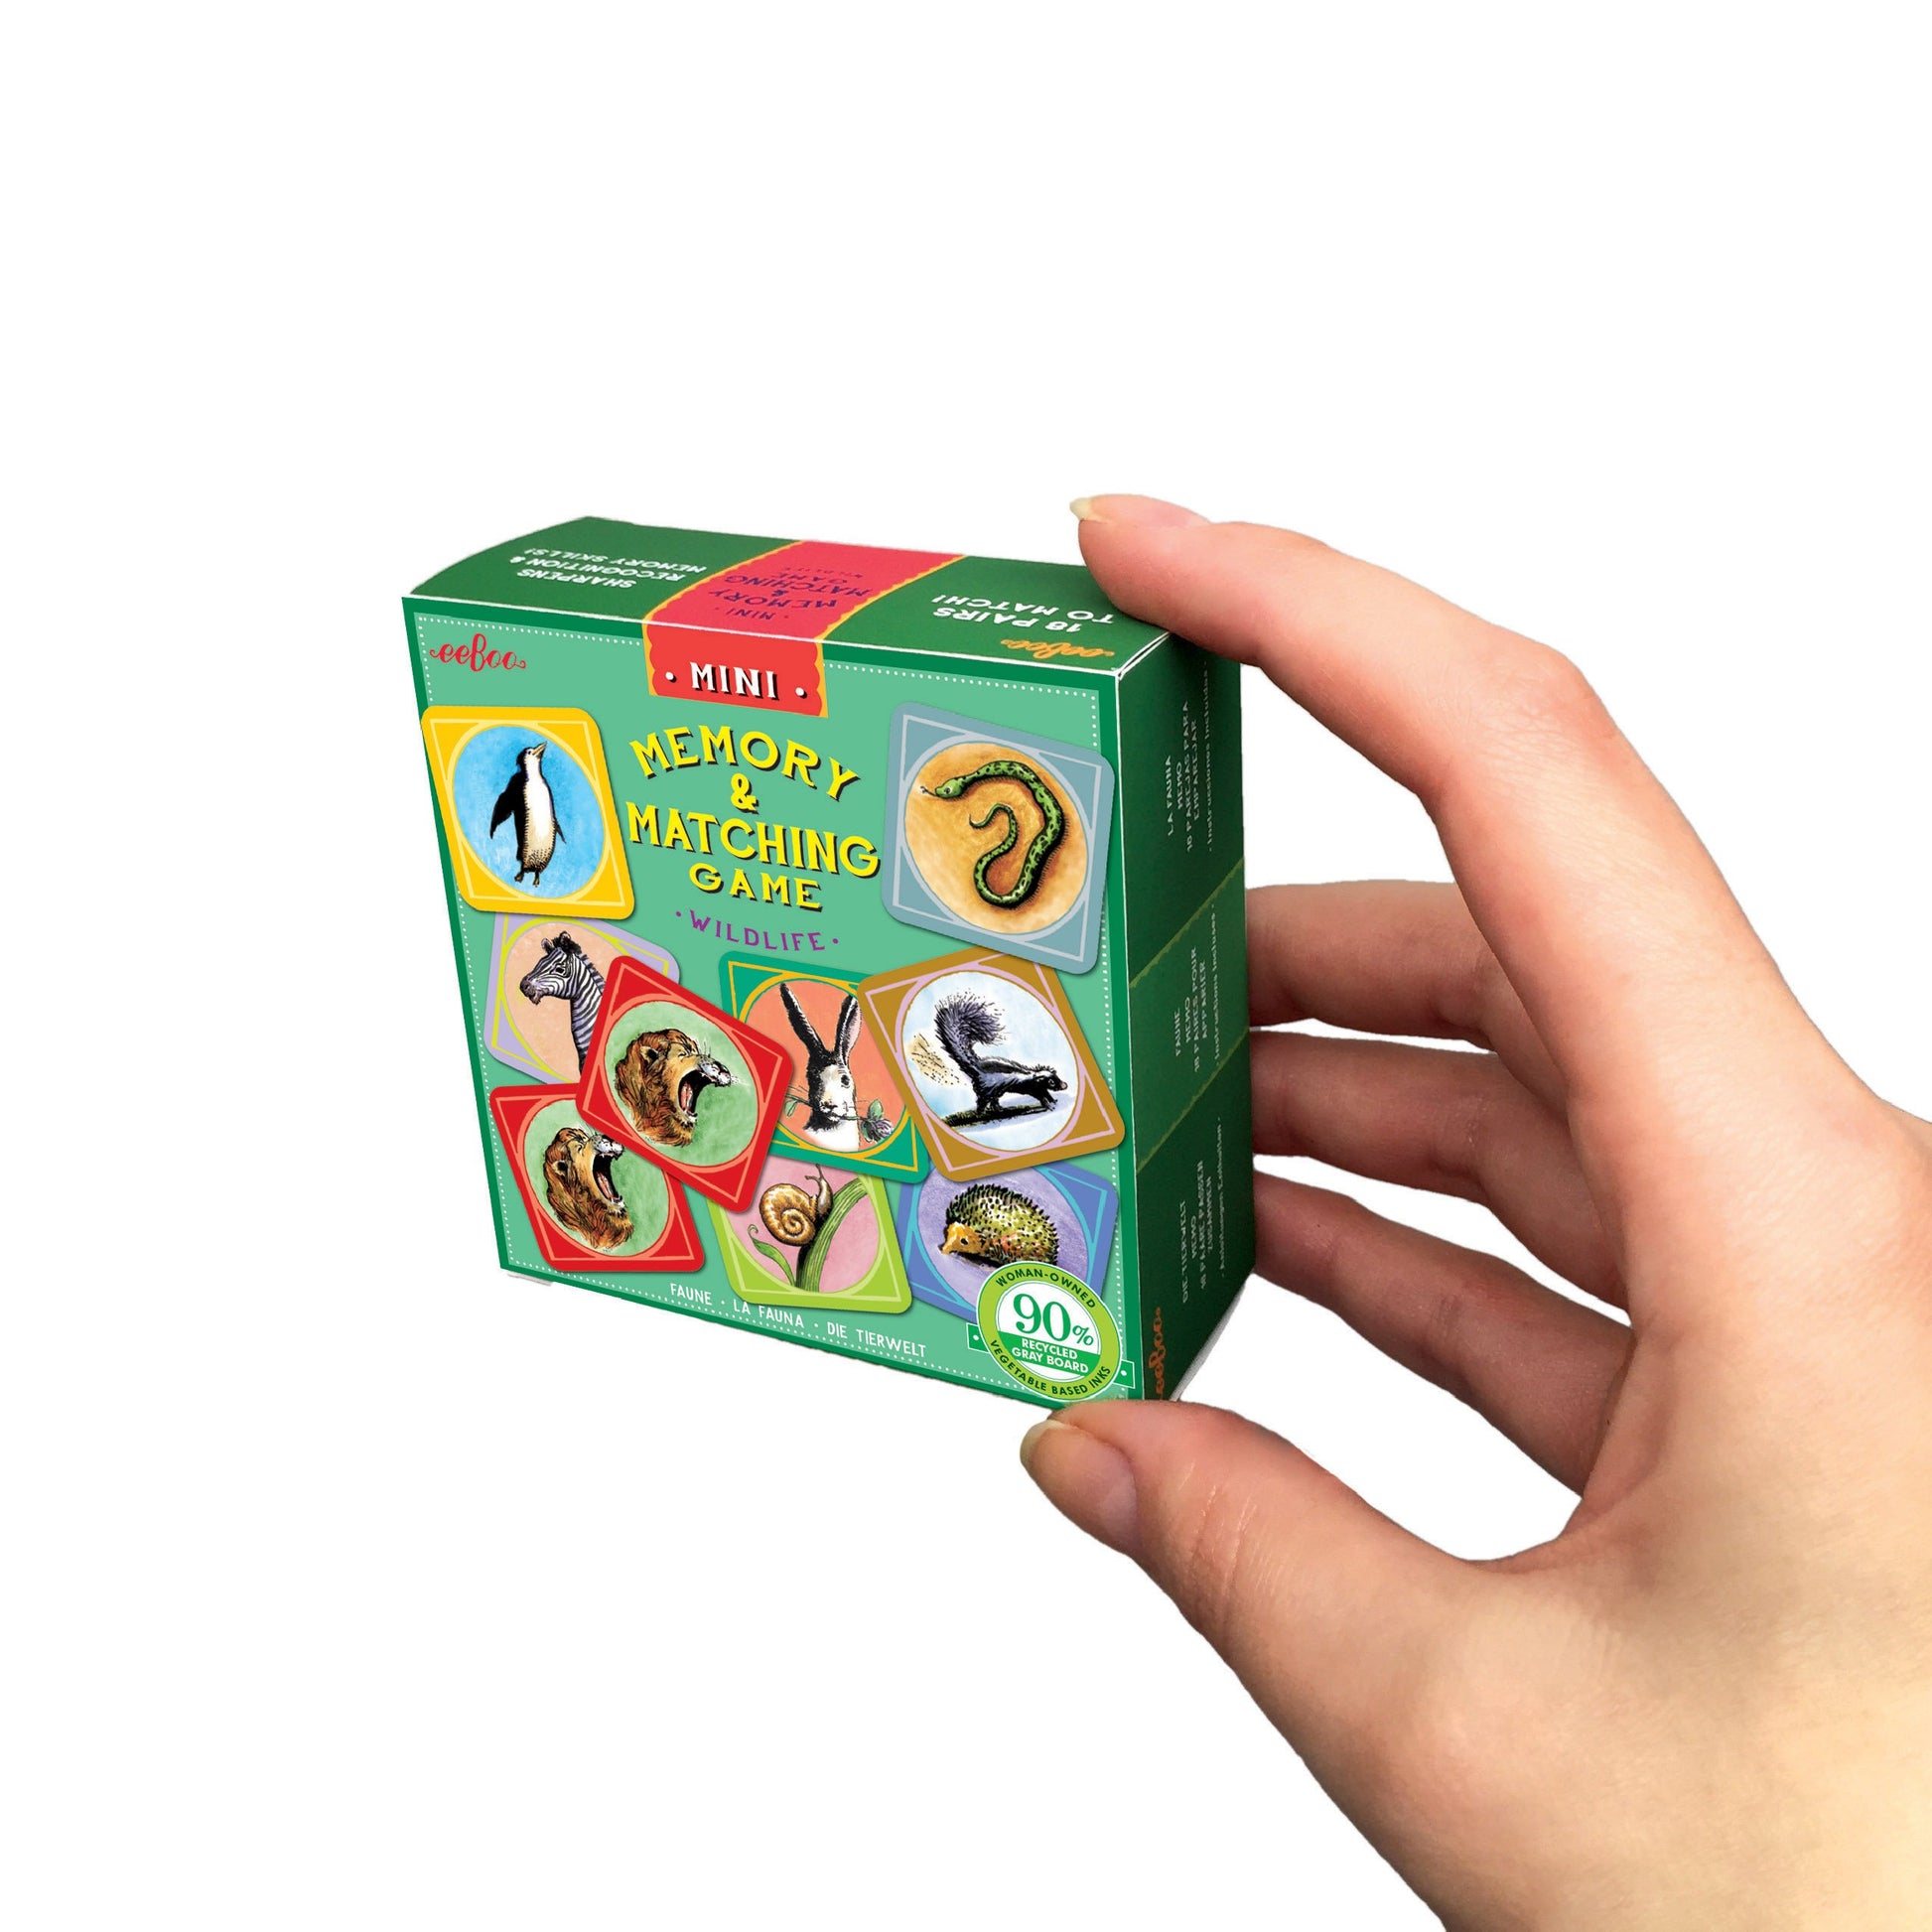 Miniature Matching Games Assortment |  Gifts by eeBoo